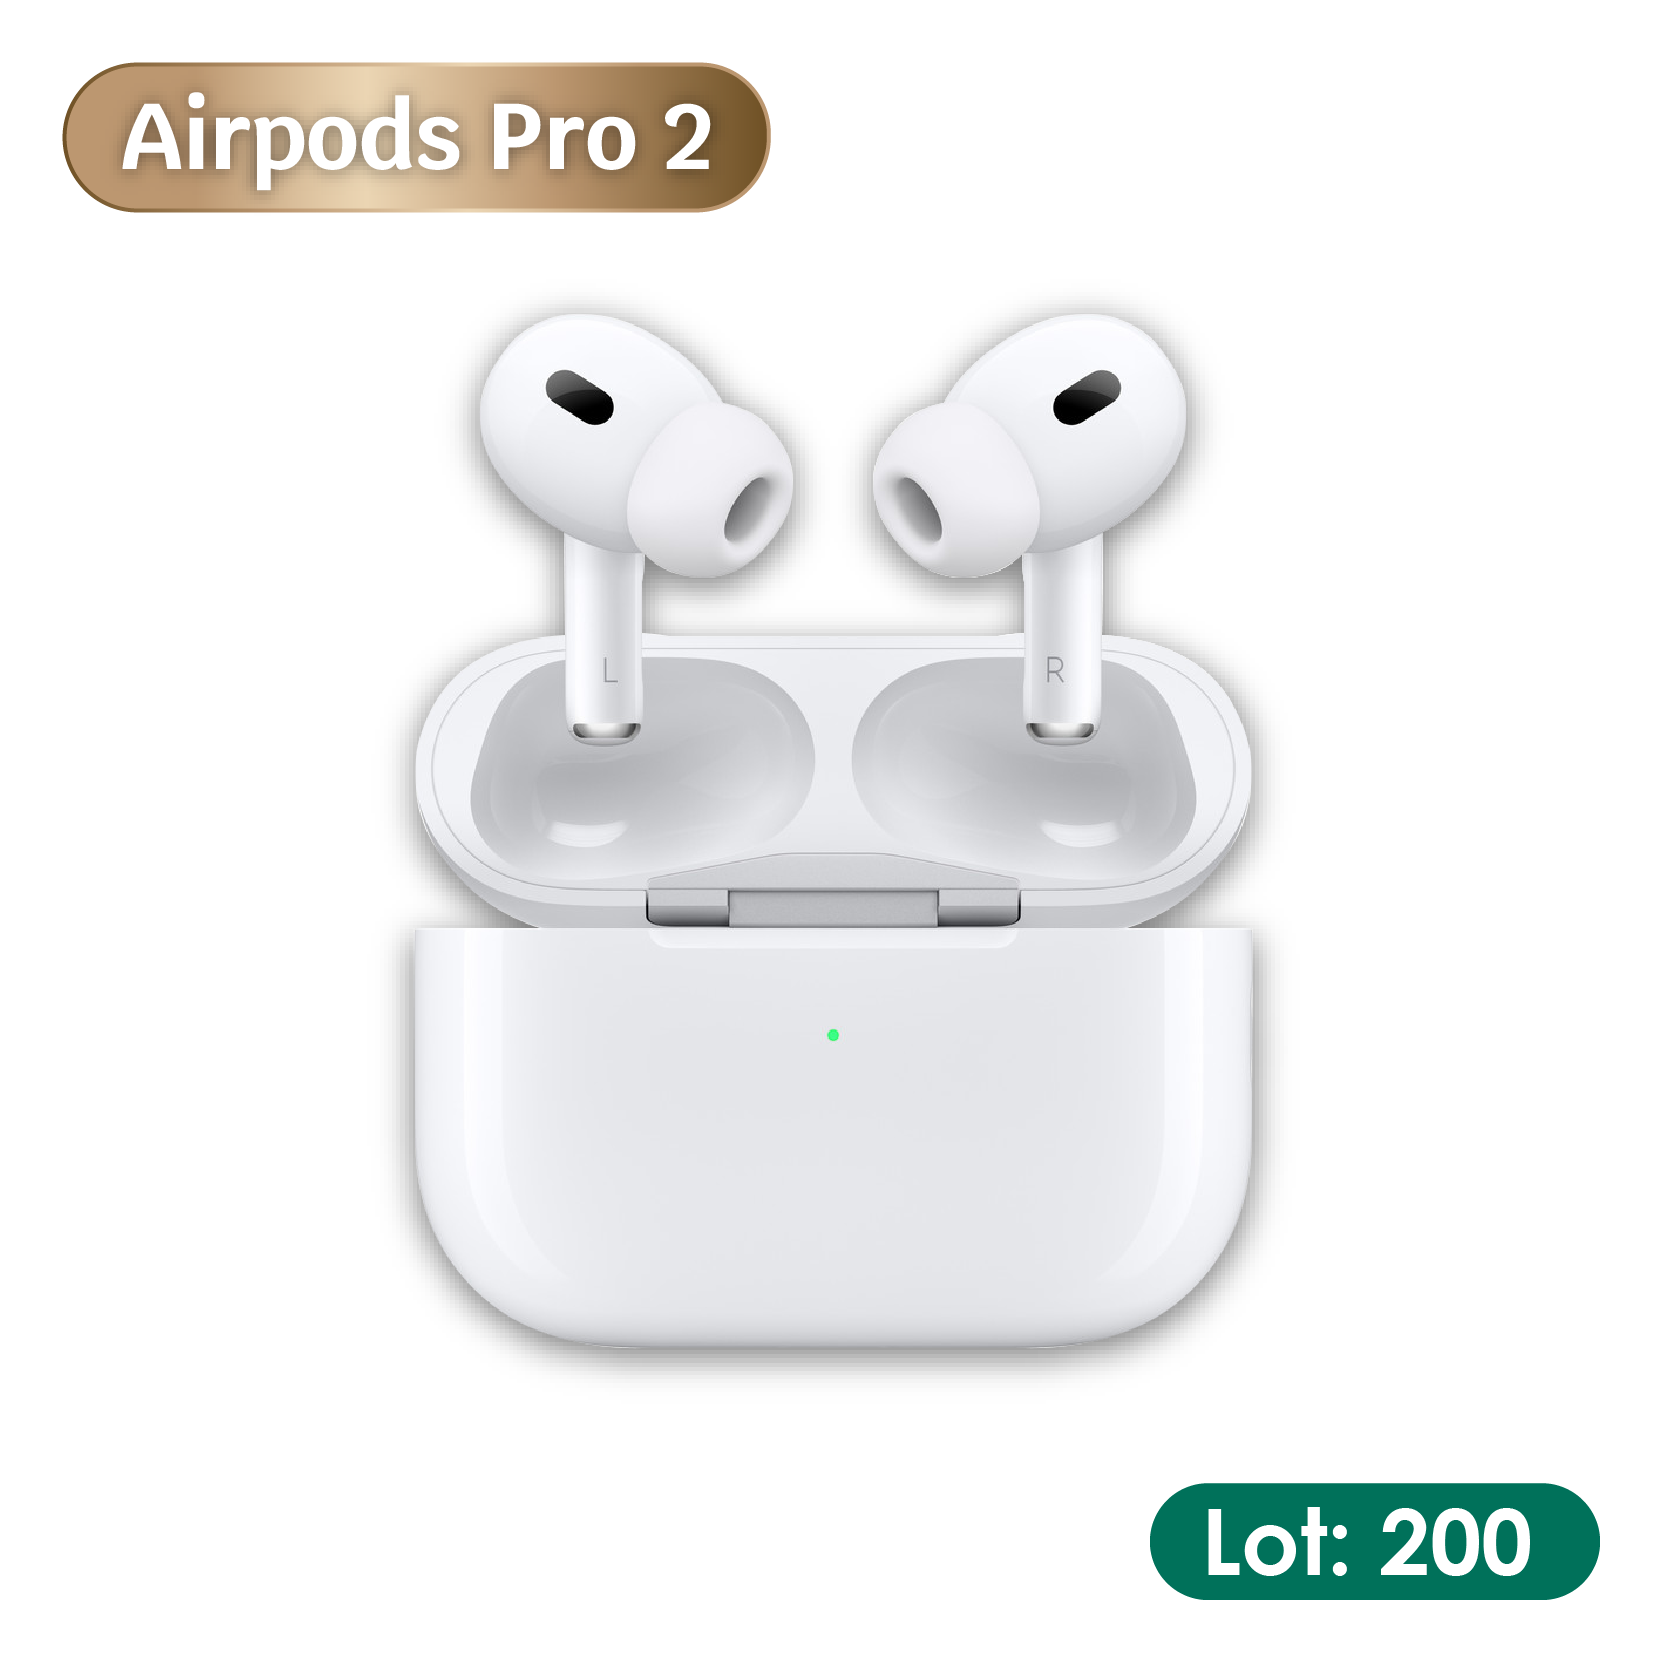 3. Airpods Pro 2 | Lot: 200